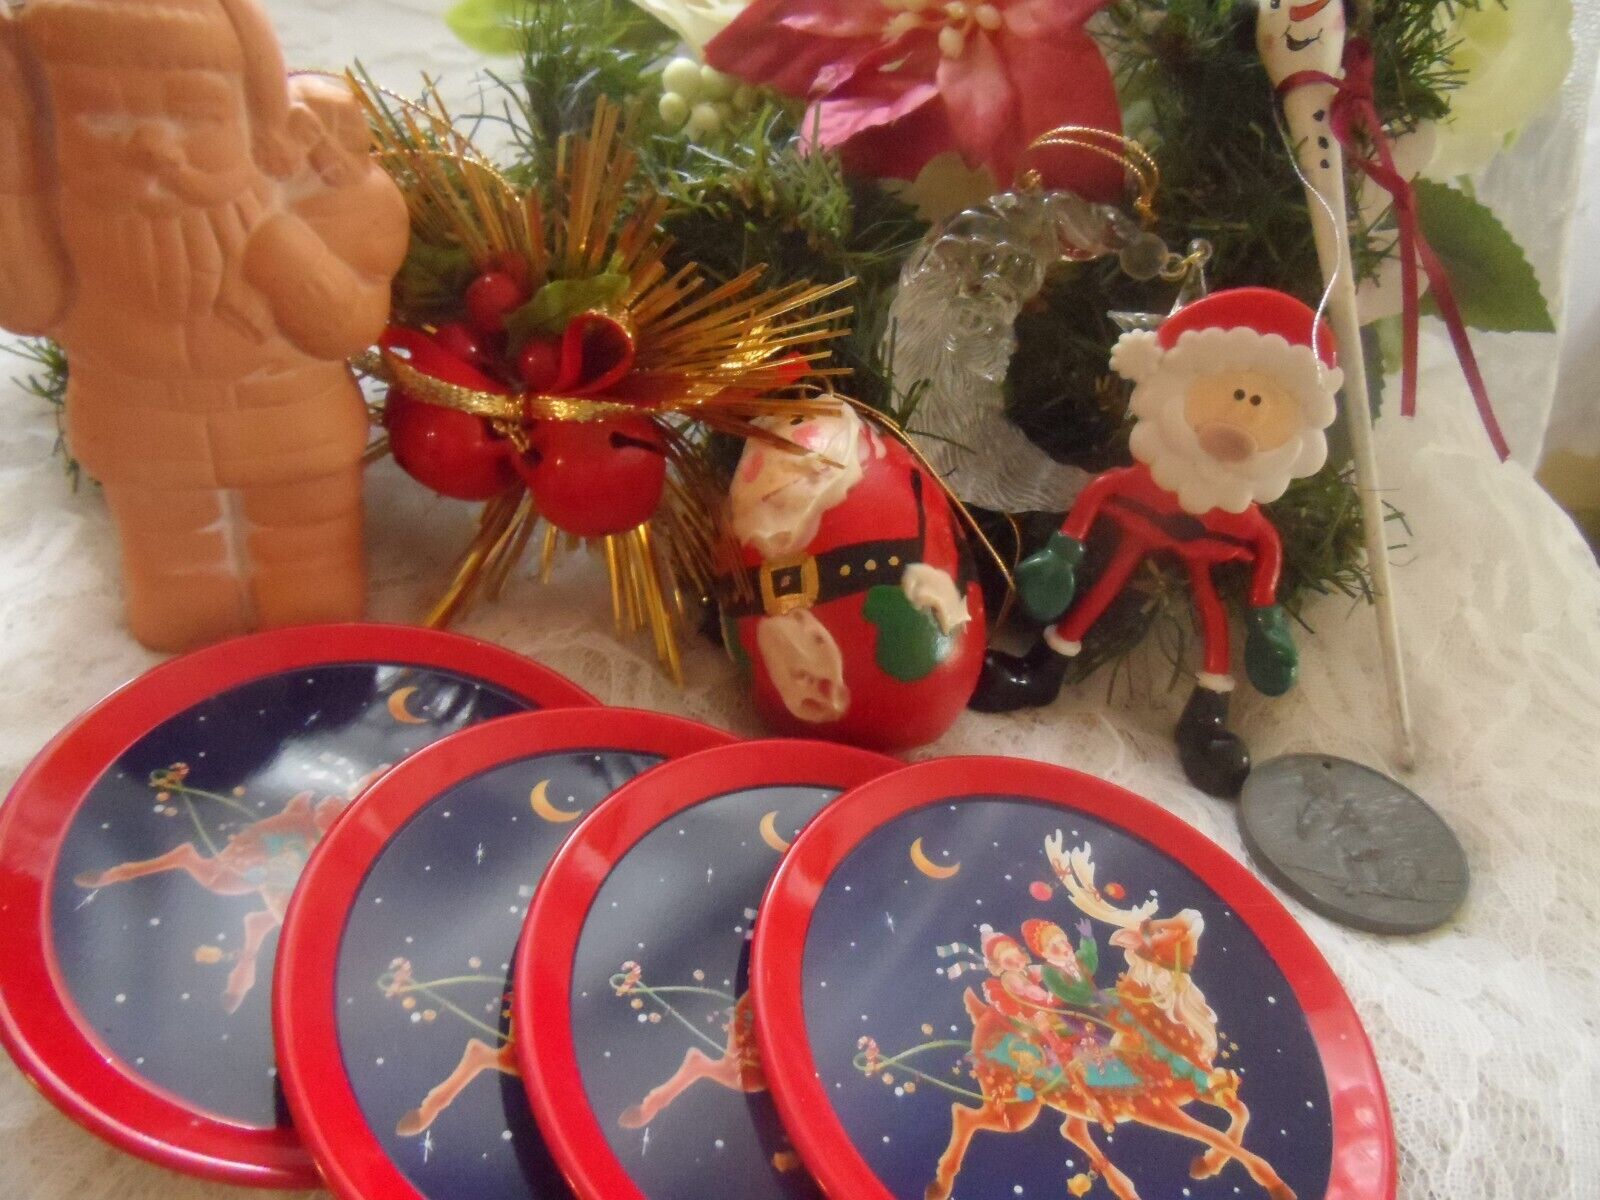 Vintage Christmas Ornaments - 11 PRE-OWNED ASSORTED  - VARIOUS SIZES & COLORS